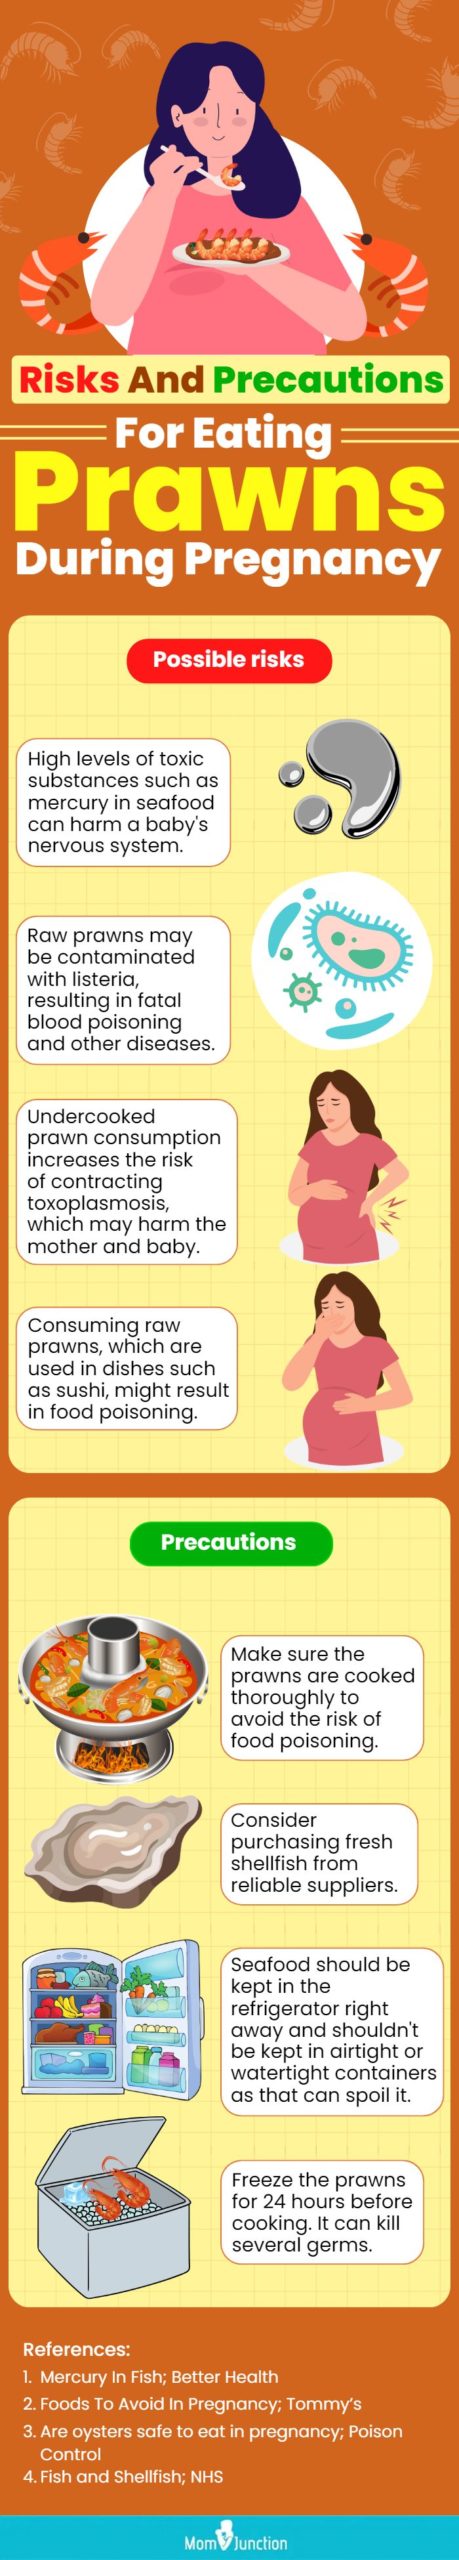 risks and precautions for eating prawns during pregnancy (infographic)